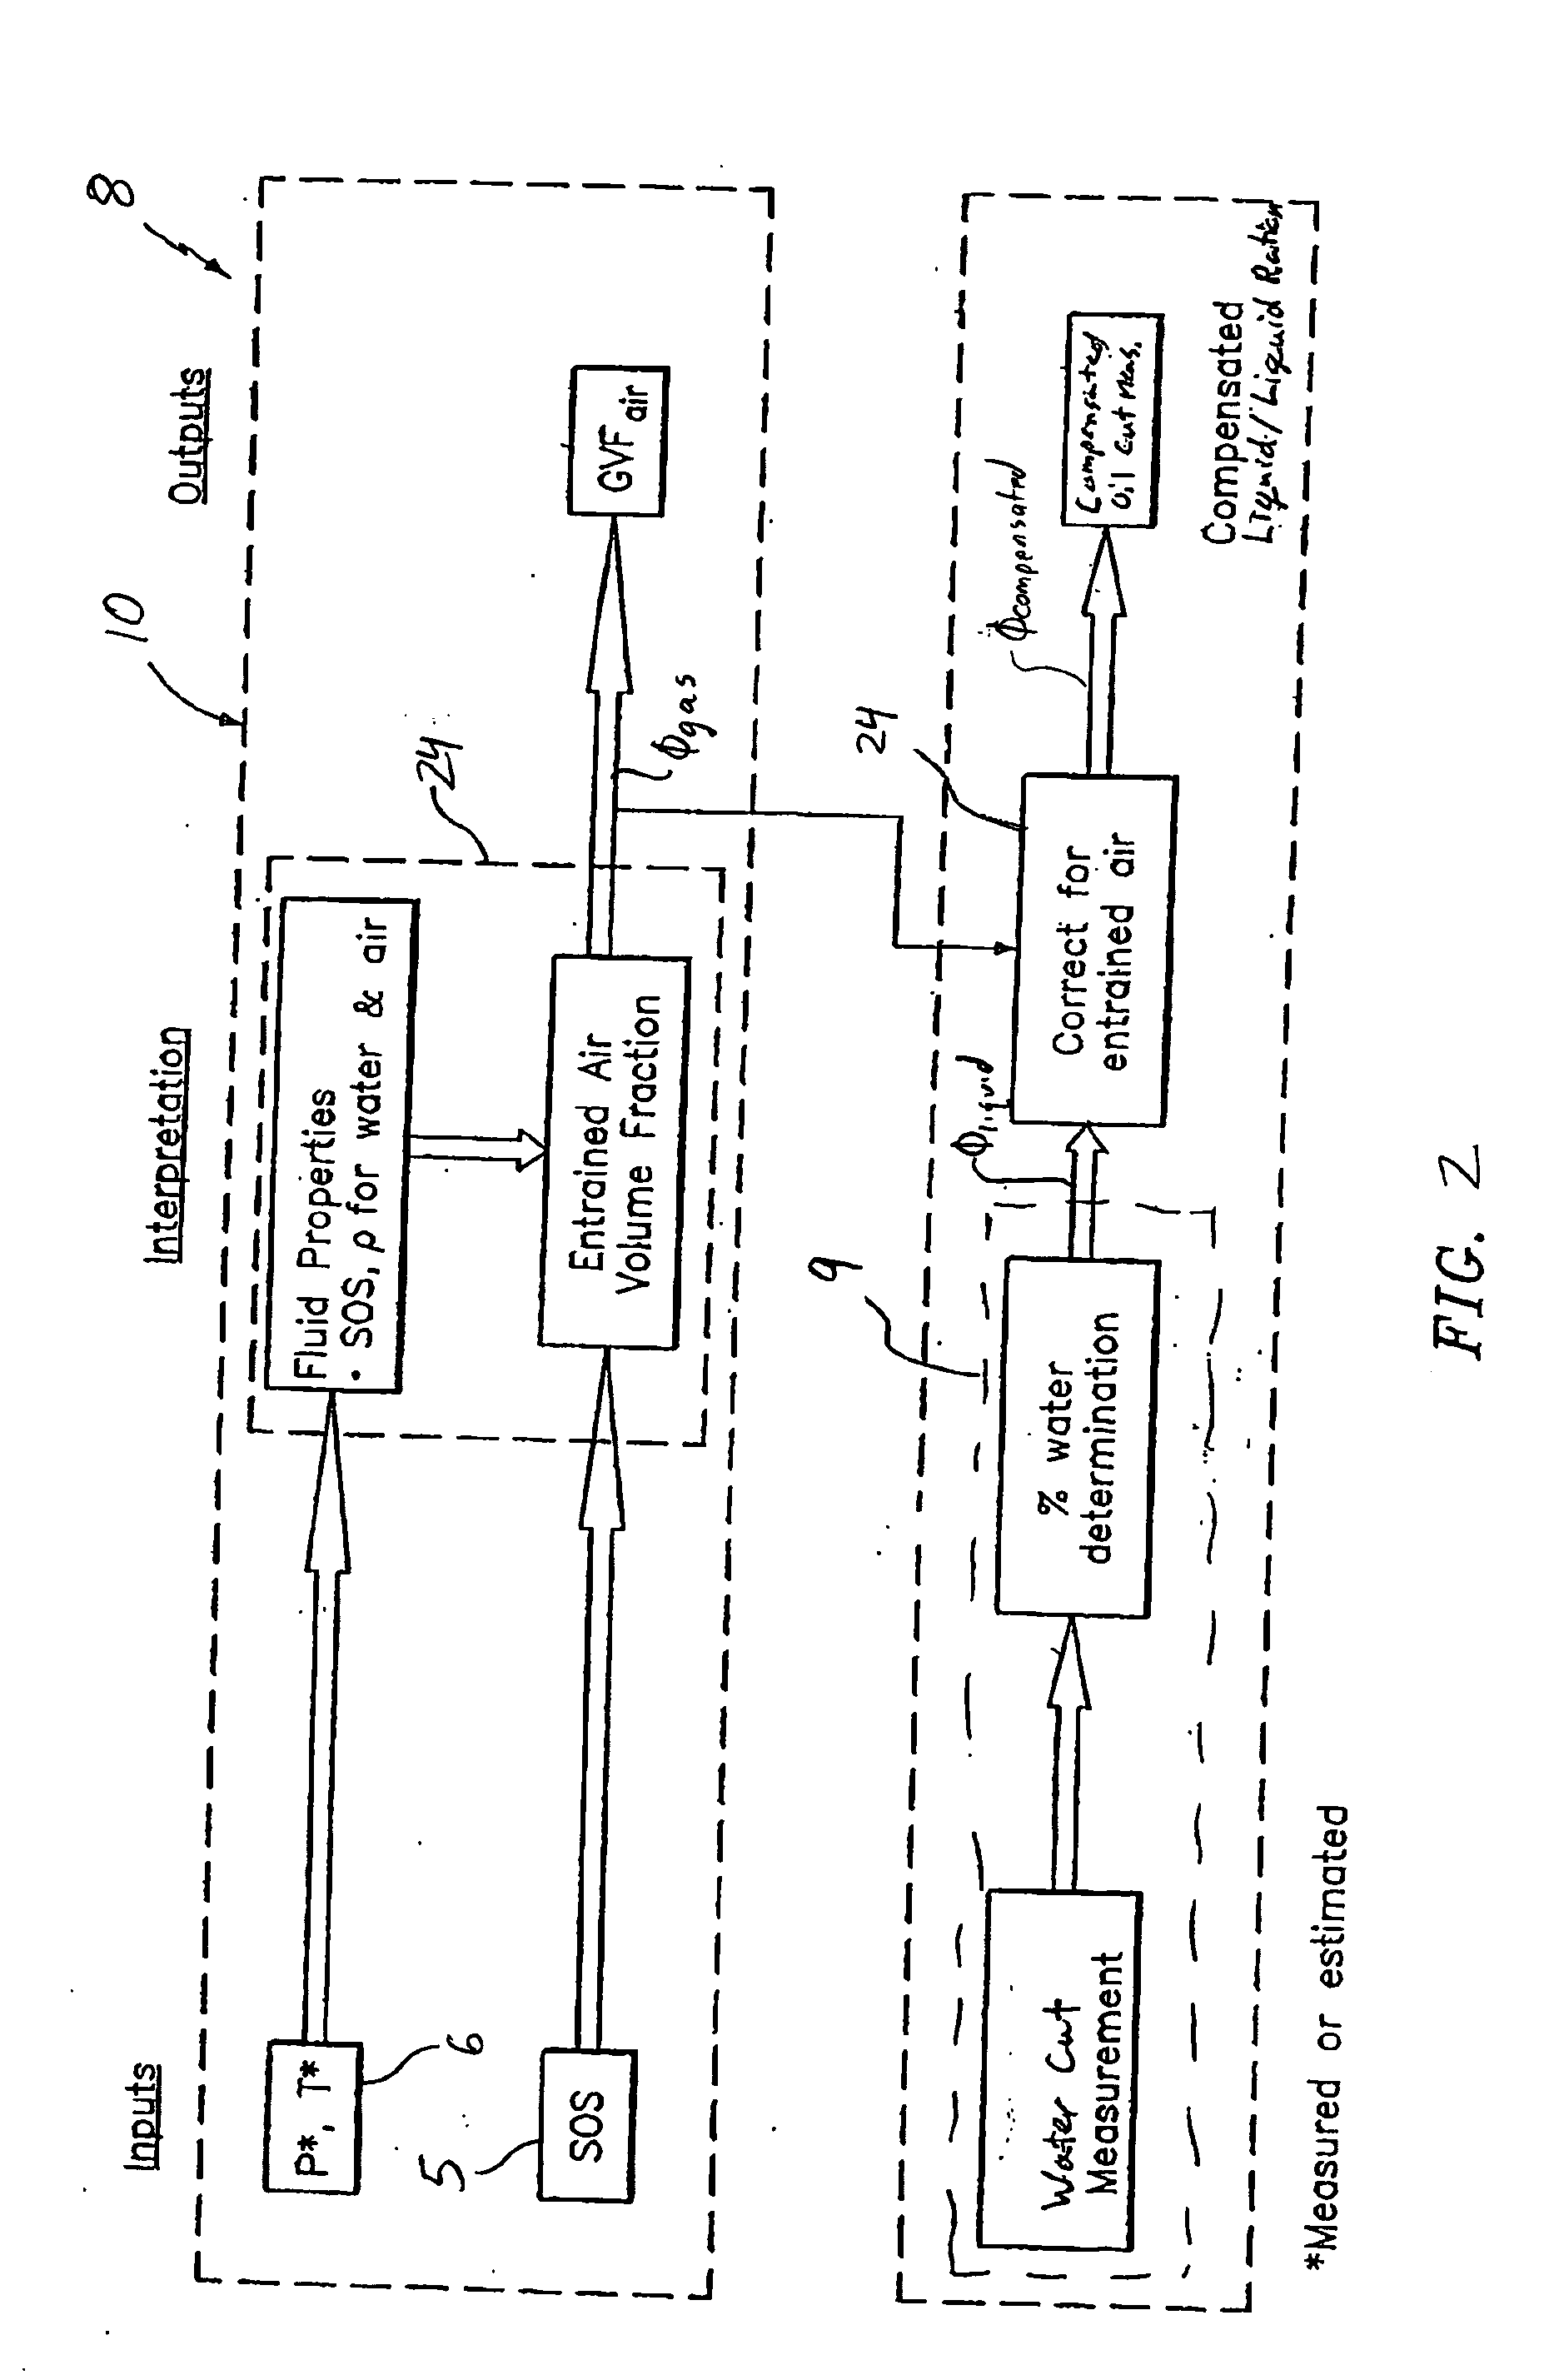 Apparatus and method for providing a fluid cut measurement of a multi-liquid mixture compensated for entrained gas